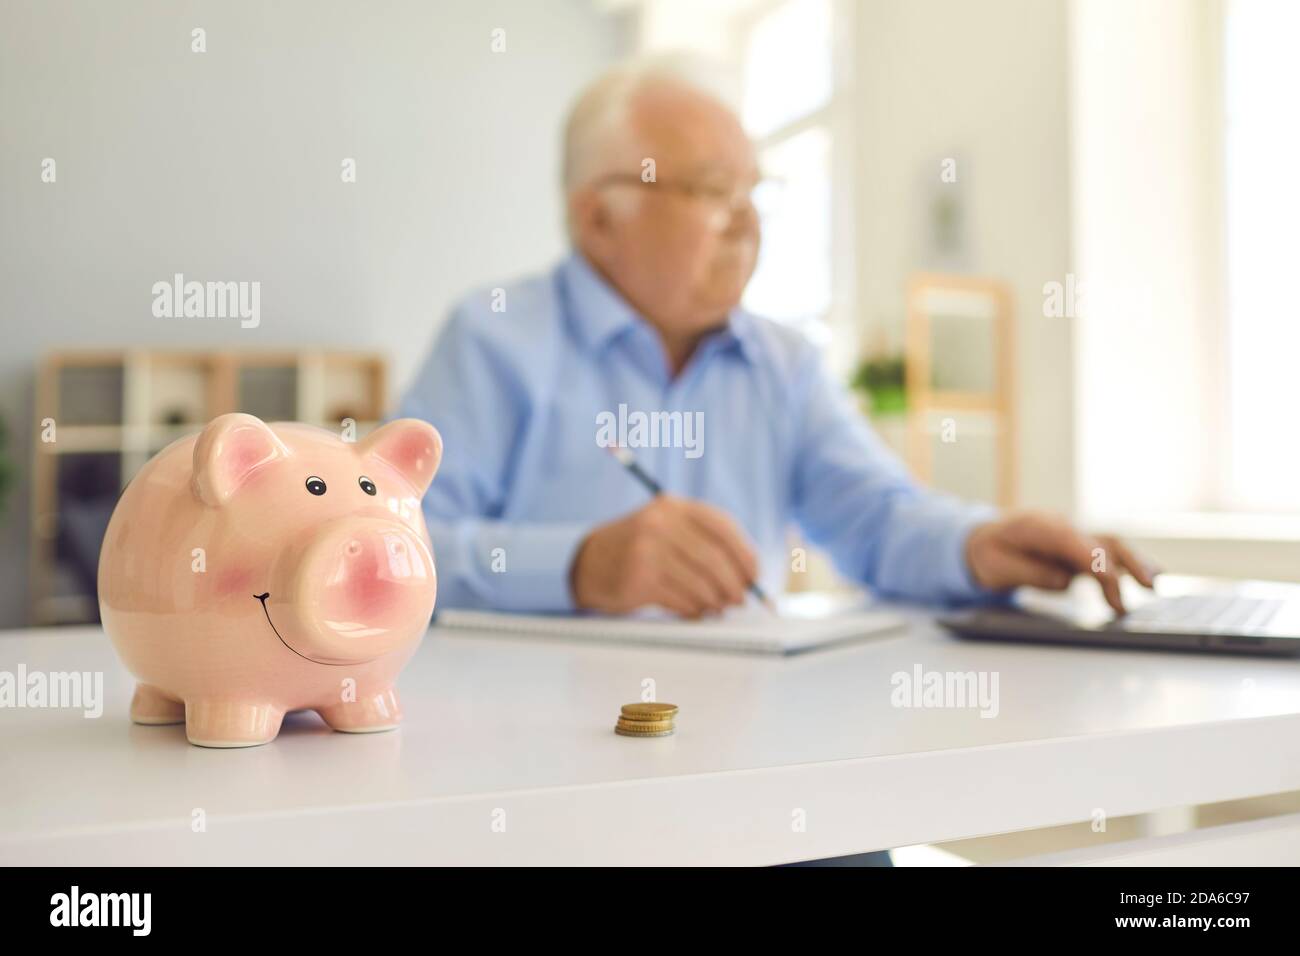 Piggy bank standing on desk with blurred retired man using laptop and doing accounting in background Stock Photo